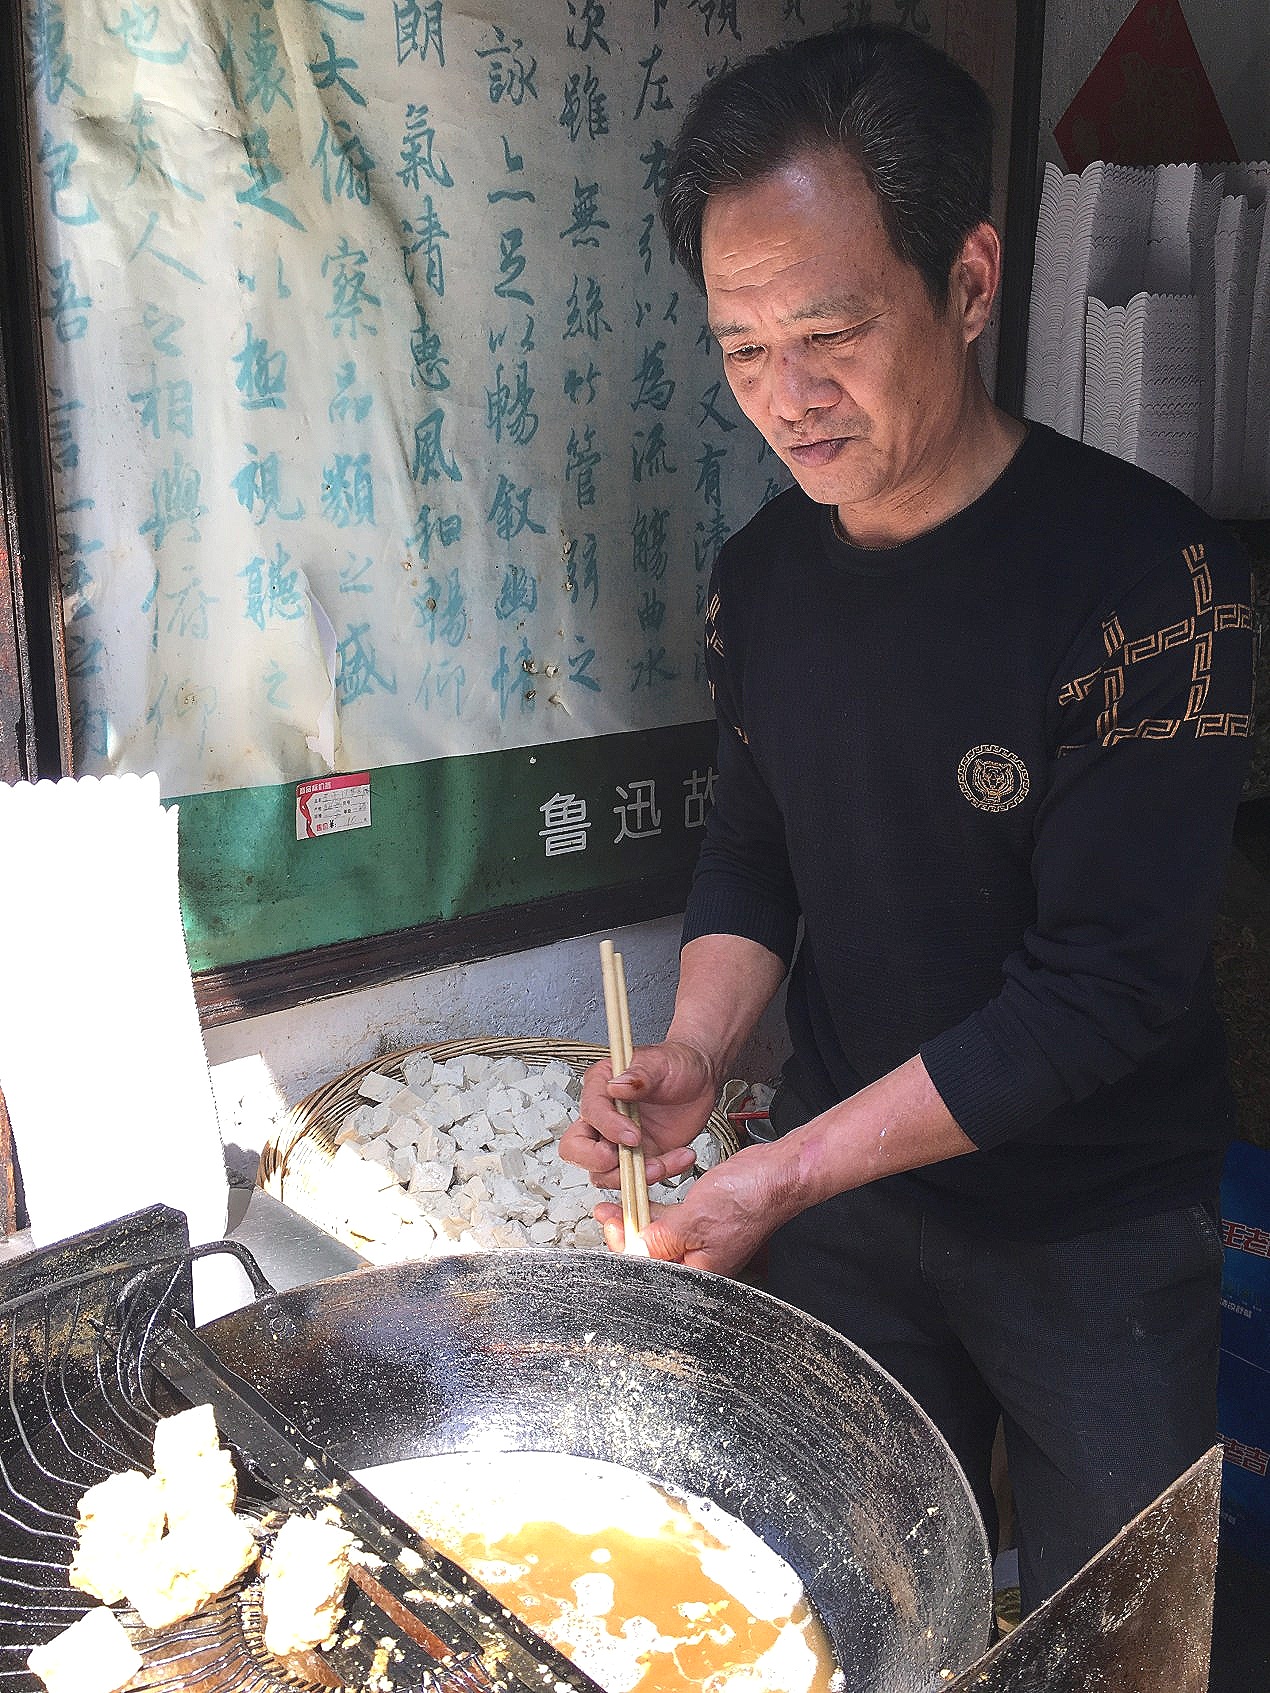 A Stink Over Fermented Tofu in Shaoxing